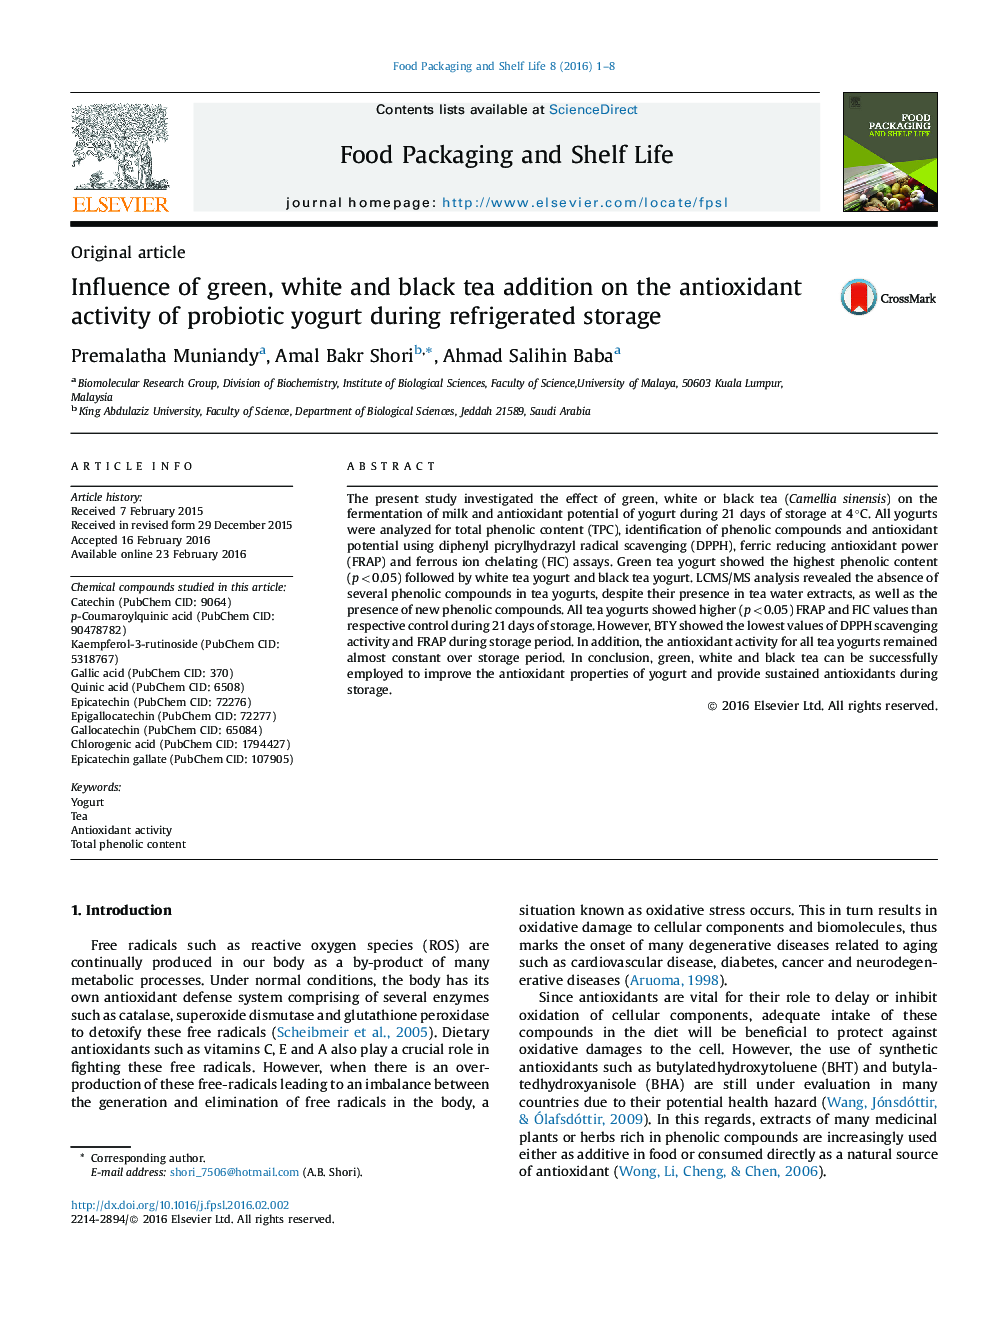 Influence of green, white and black tea addition on the antioxidant activity of probiotic yogurt during refrigerated storage